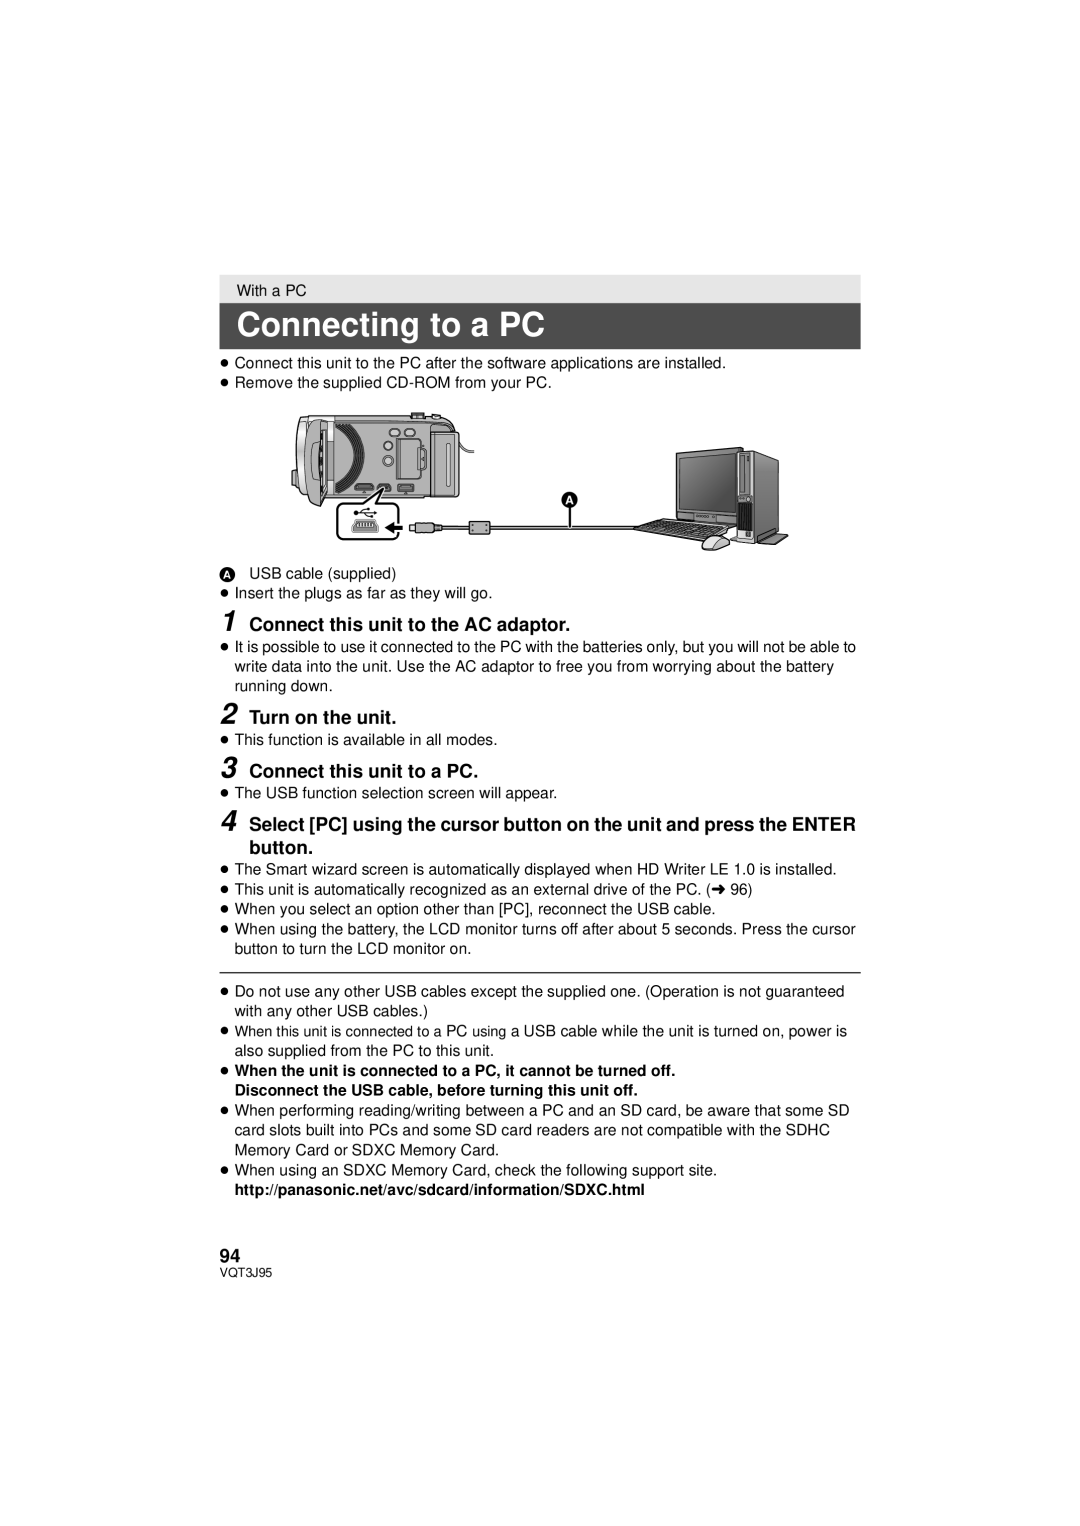 Panasonic HDC-TM41P/PC, HDC-SD40P/PC owner manual Connecting to a PC, Connect this unit to the AC adaptor, Turn on the unit 